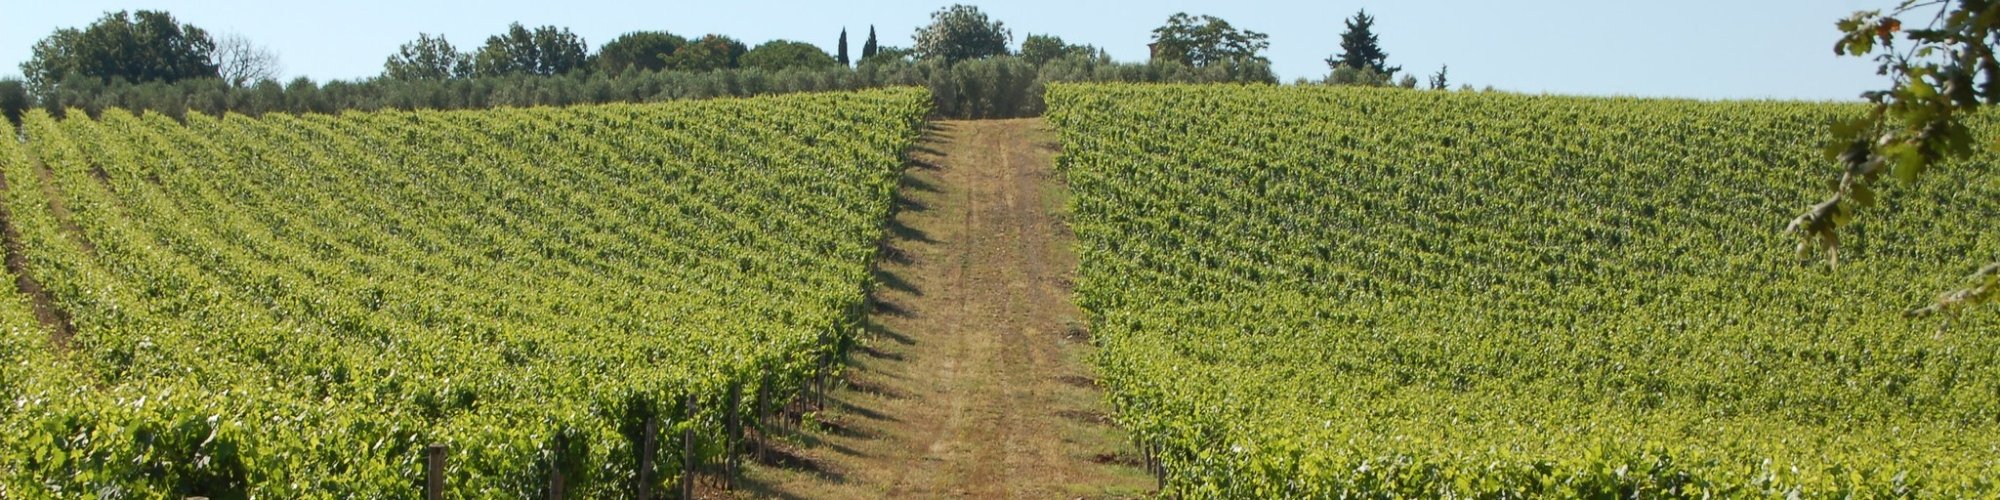 The DOCG wines of Tuscany